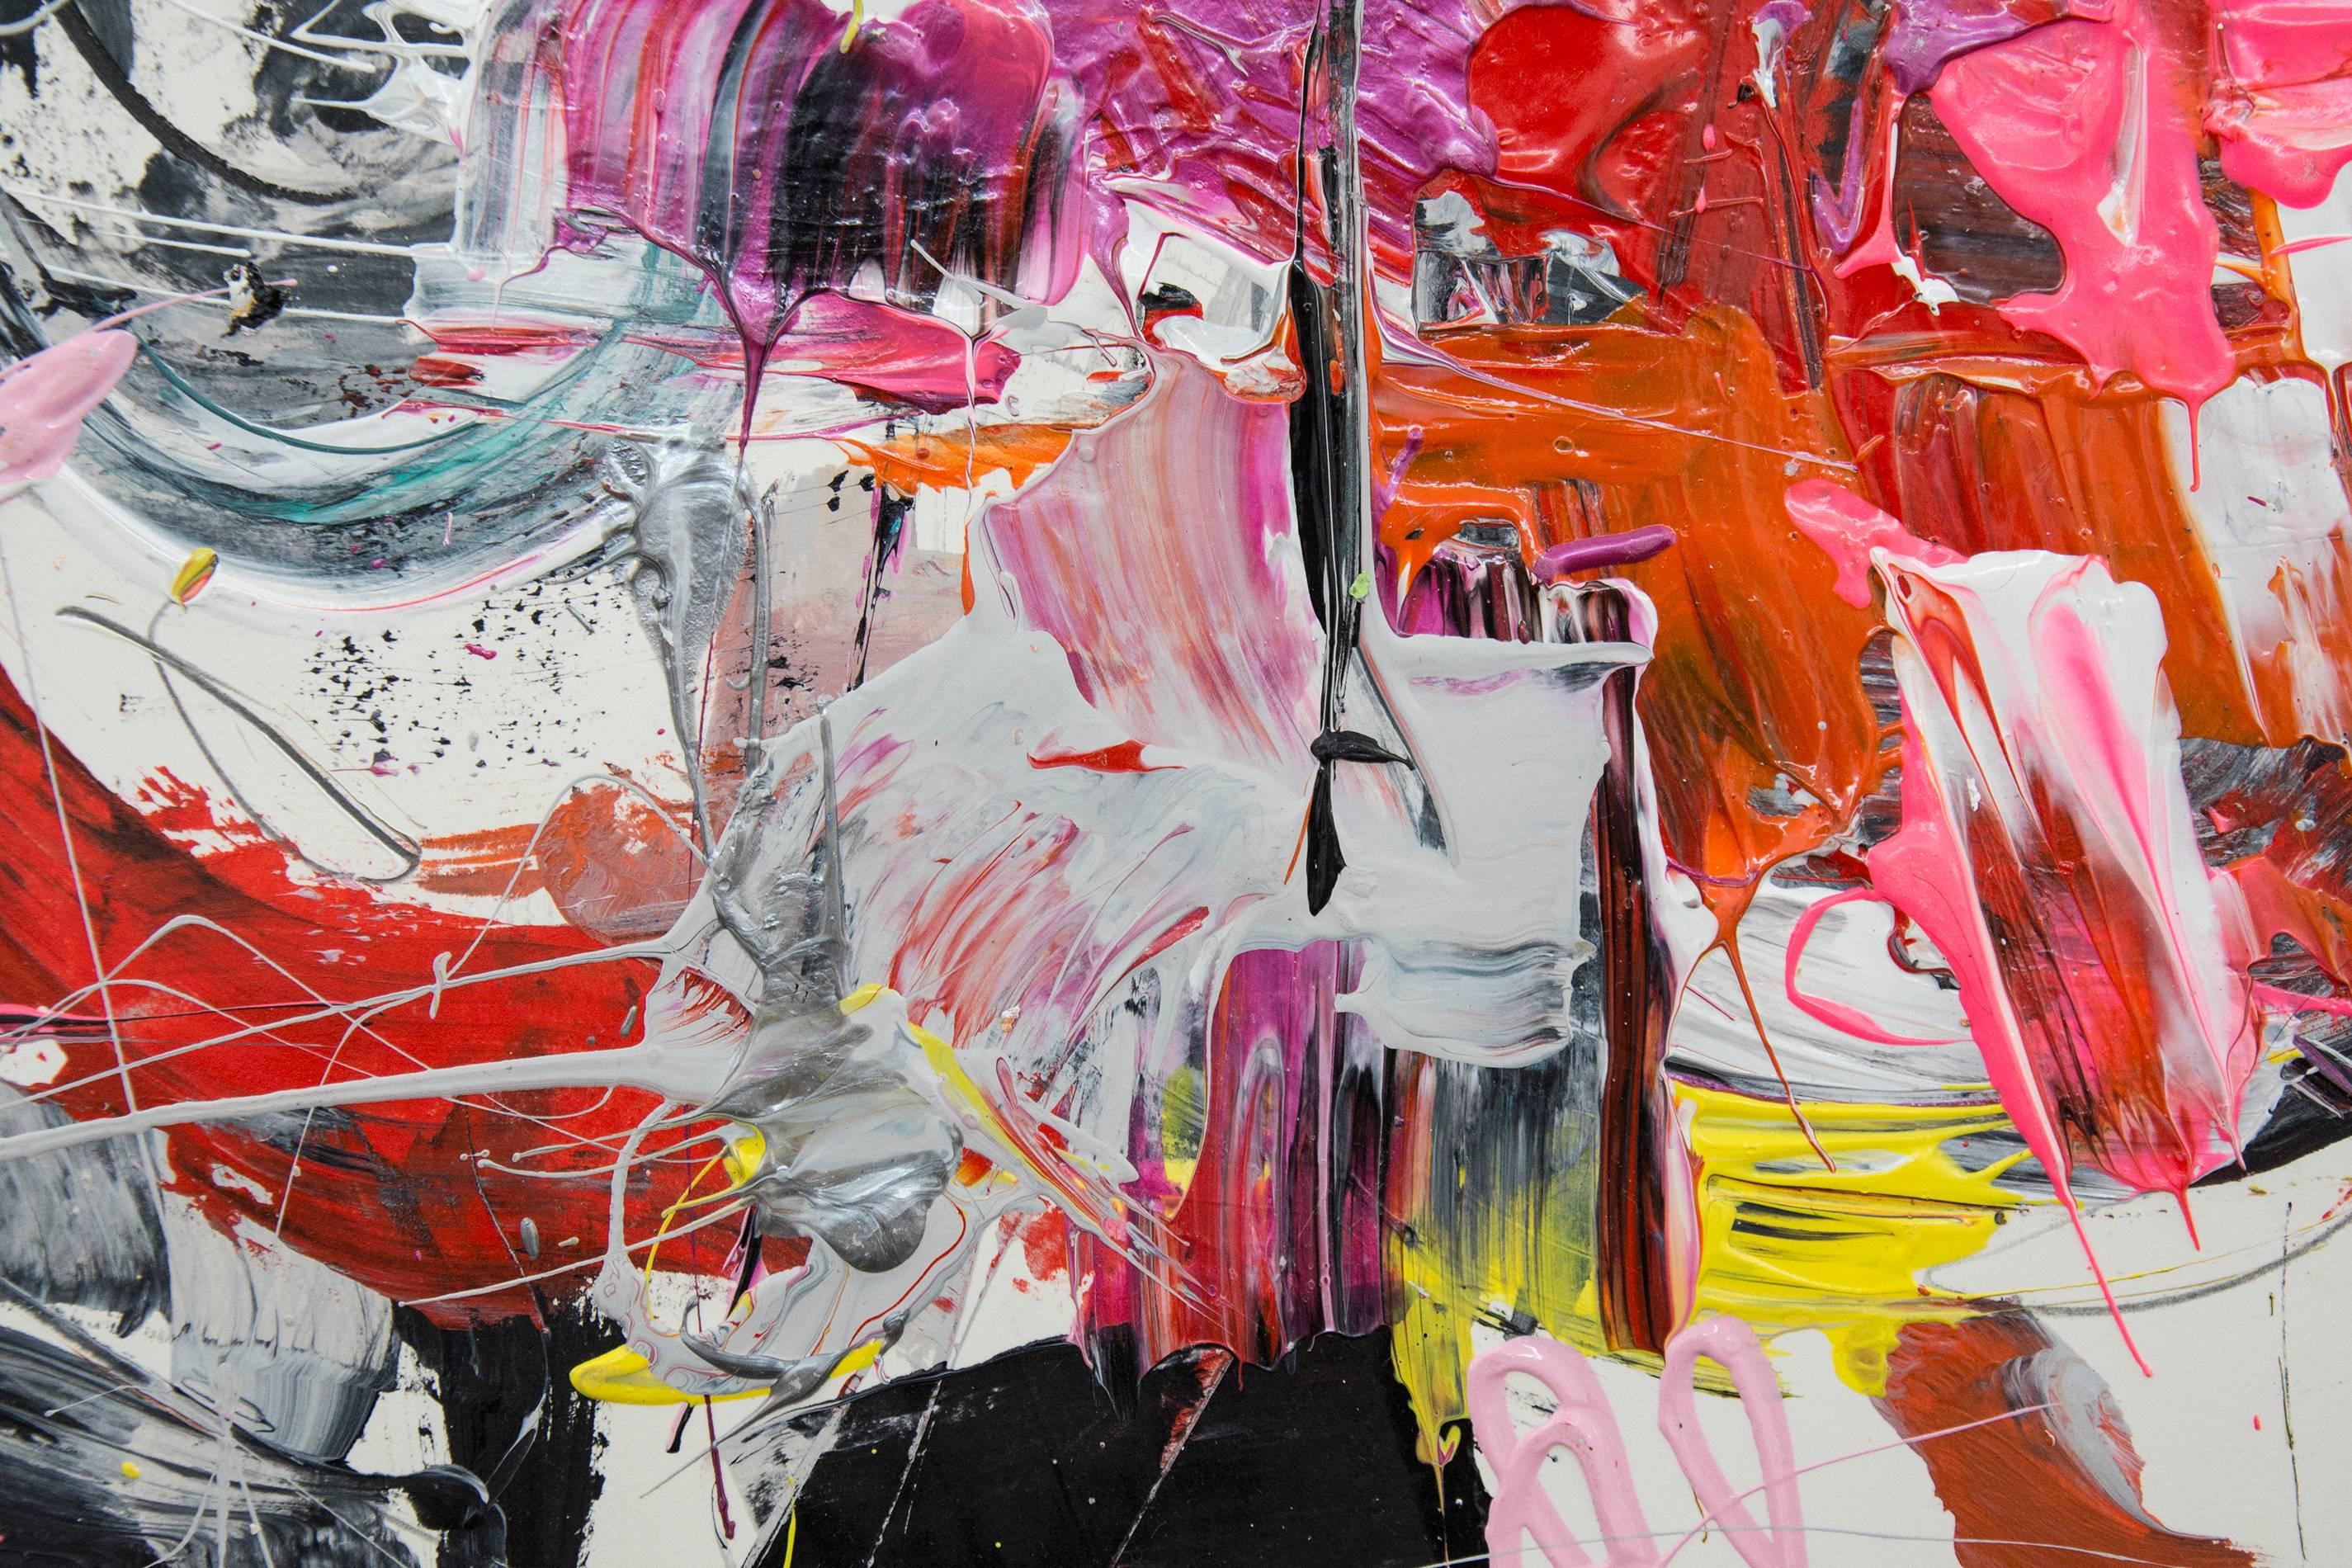 Hot pink and red intersects with drips and splashes of yellow, magenta and orange in this dynamic acrylic painting on paper. Beneath the energetic surface a scaffold of black completes the composition. Cohen intersects the language Abstract